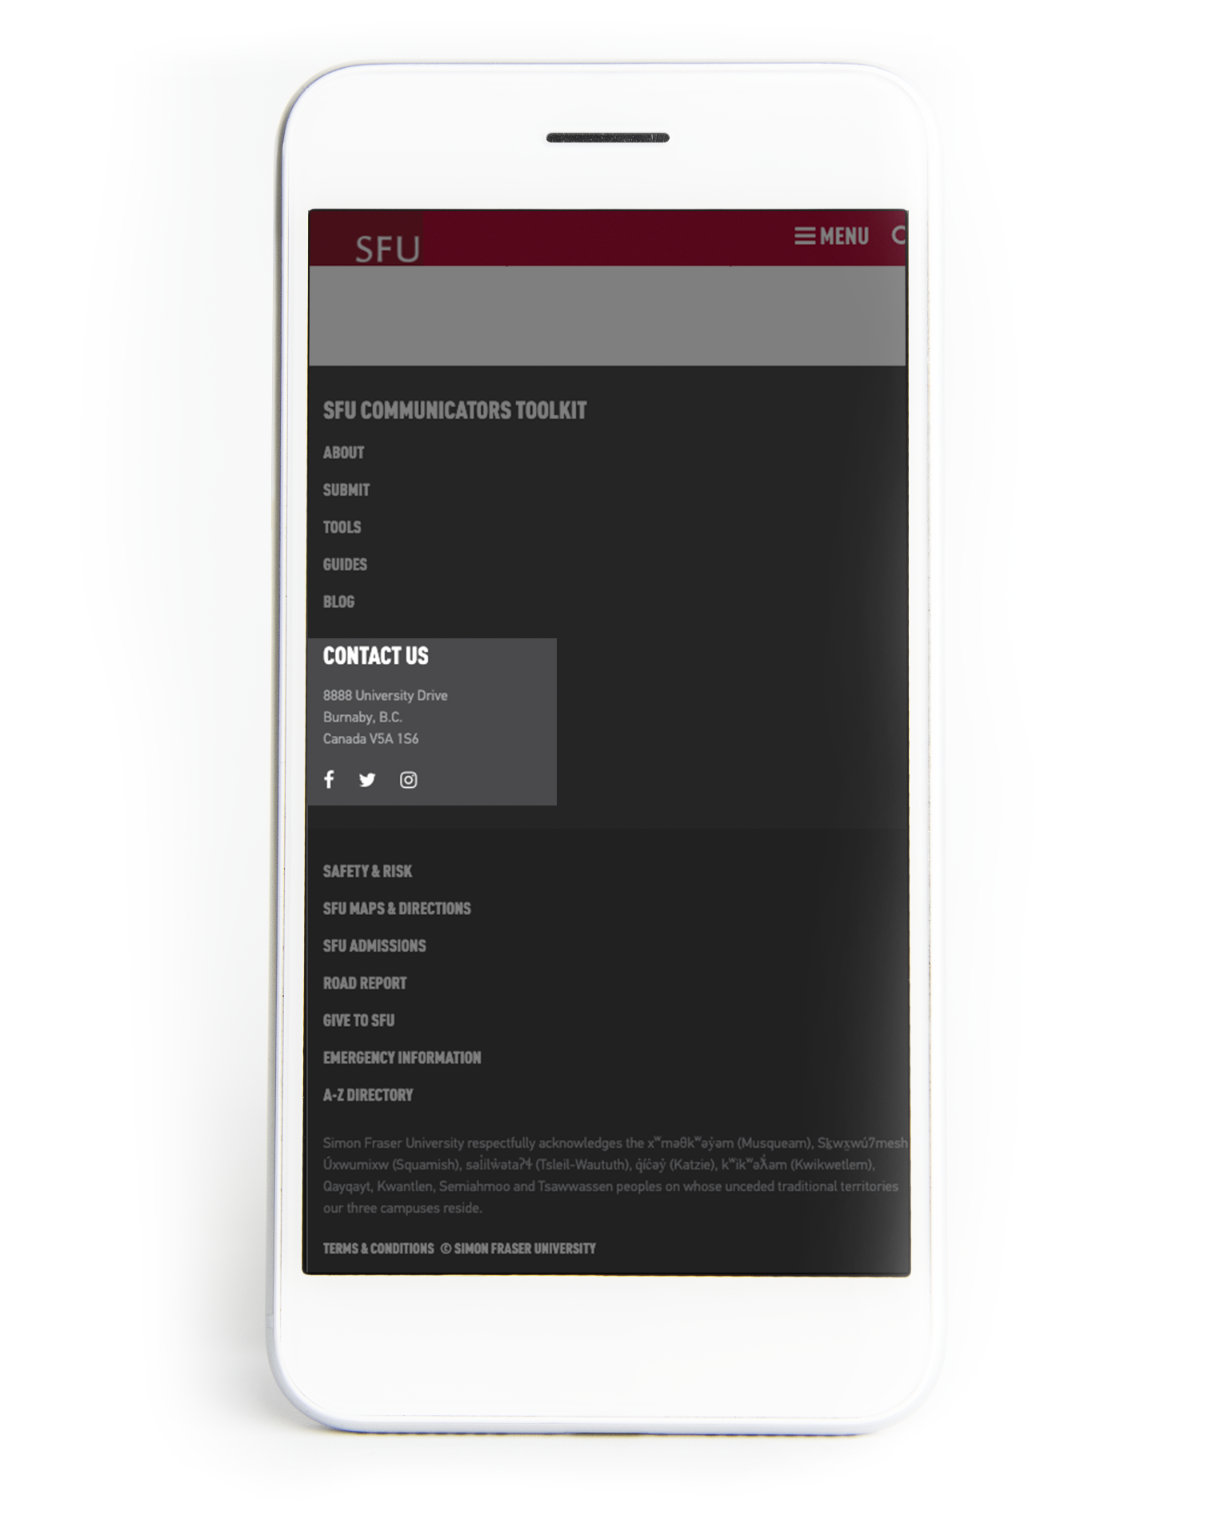 Footer sample on a mobile setting